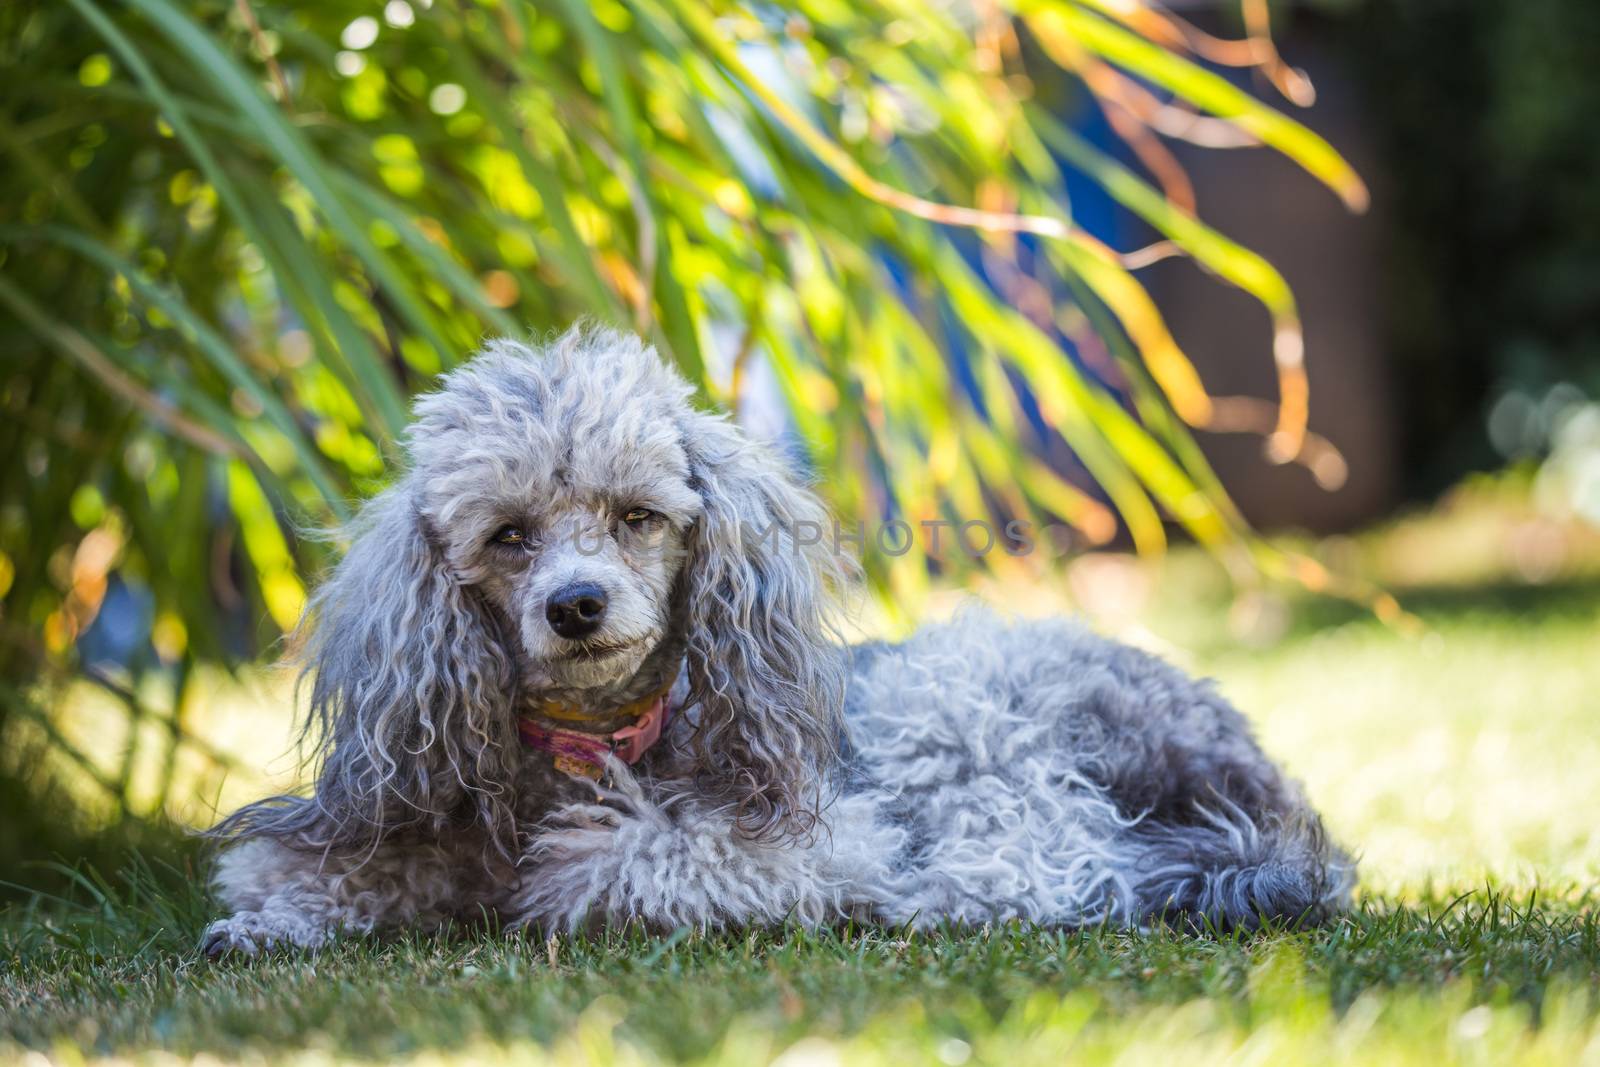 A miniature gray poodle toy standing on a green lawn.